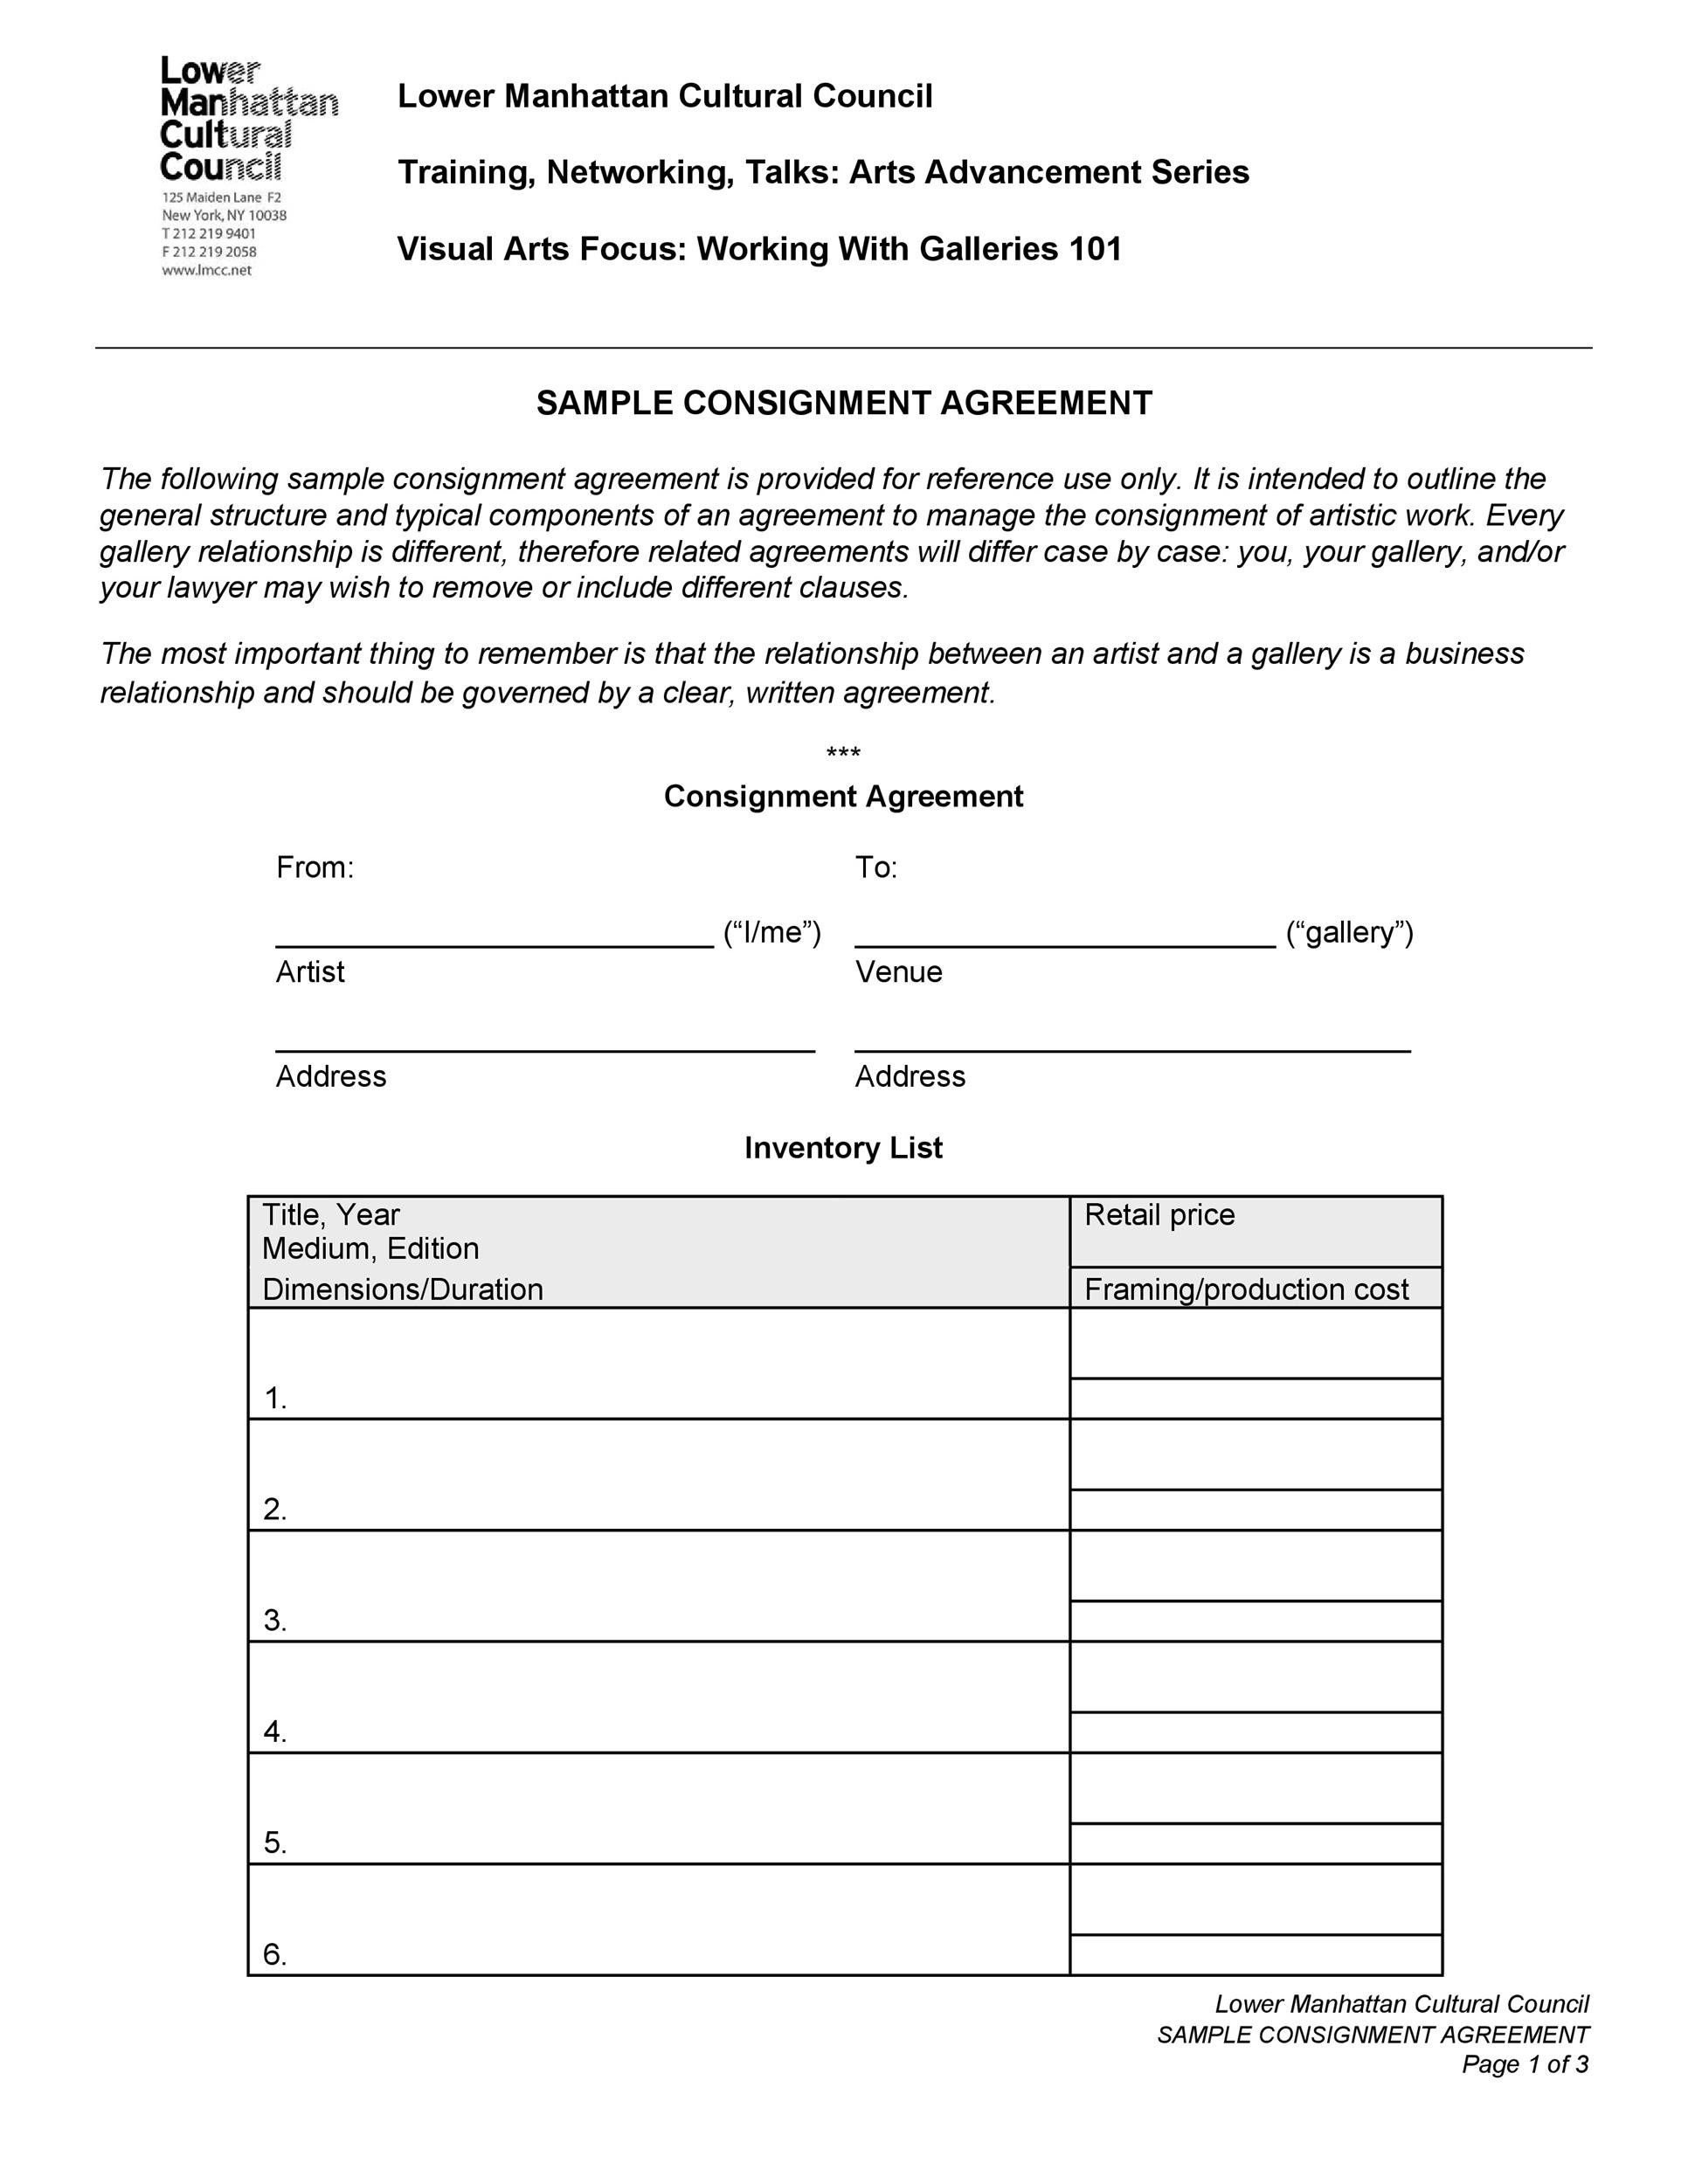 Consignment Agreement Form  Free Agreement Templates In simple consignment agreement template